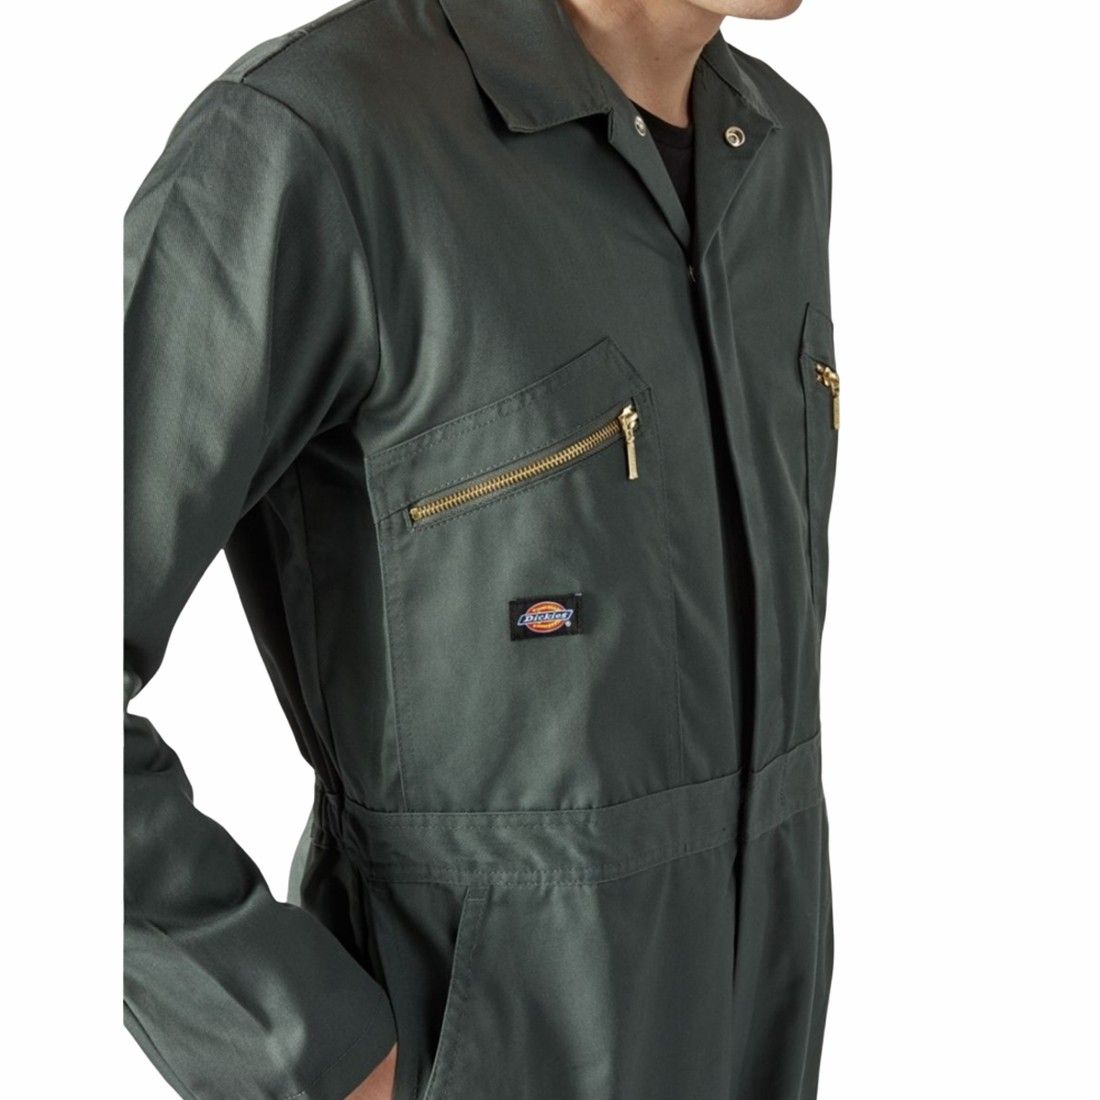 Combinaison professionnelle homme Dickies Workwear